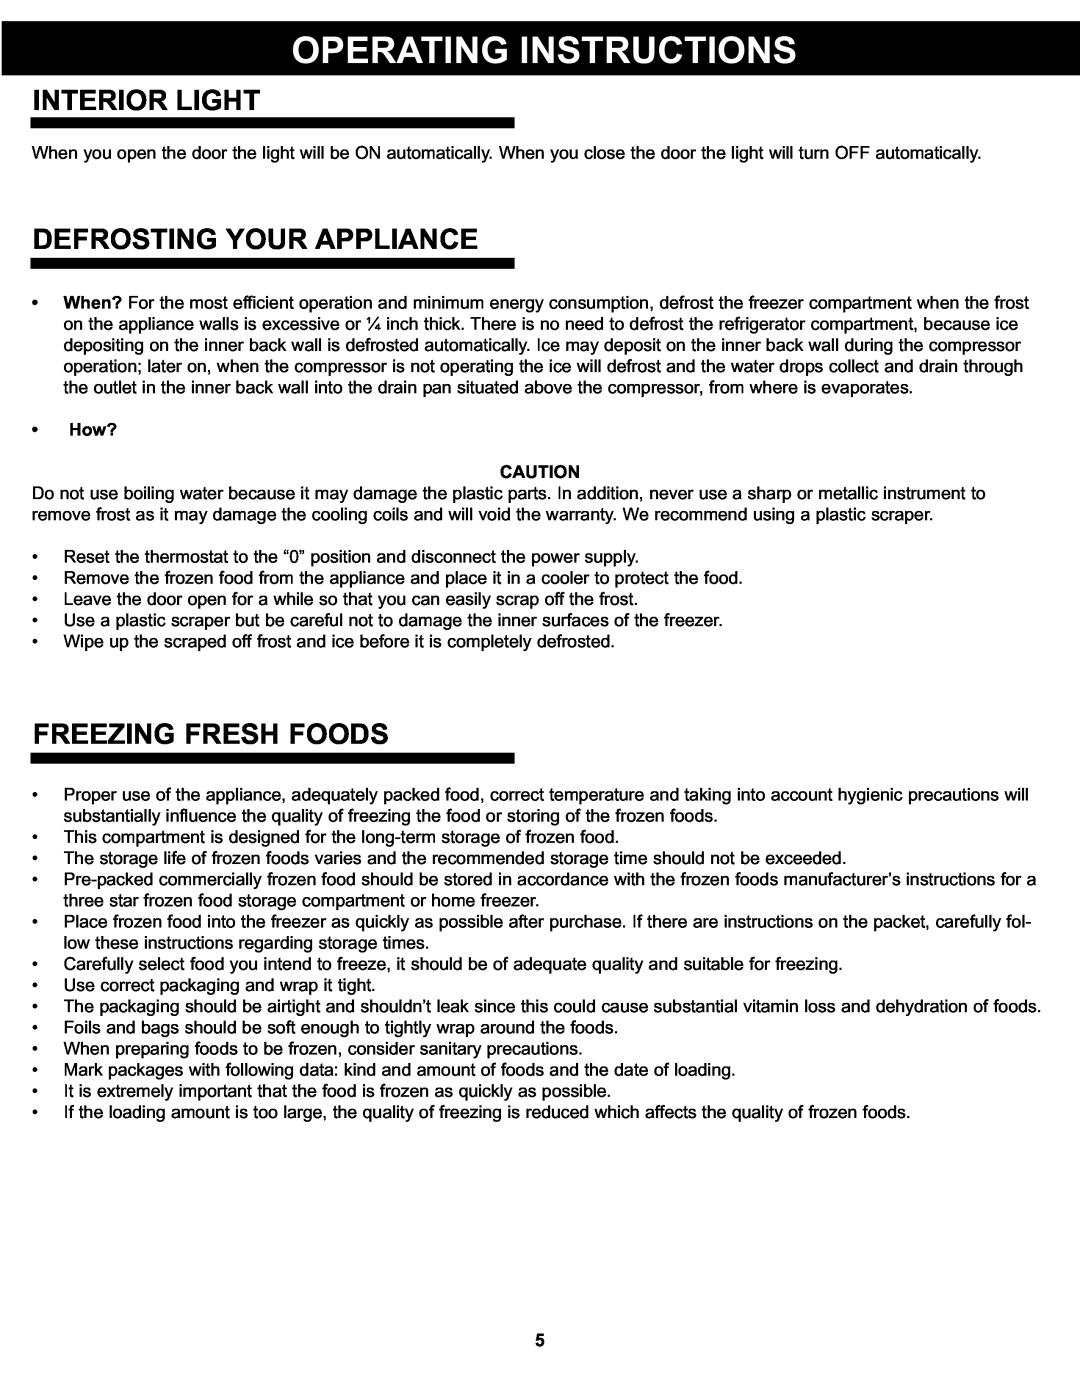 Danby DPF074B1WDB manual Interior Light, Defrosting Your Appliance, Freezing Fresh Foods, Operating Instructions, How? 